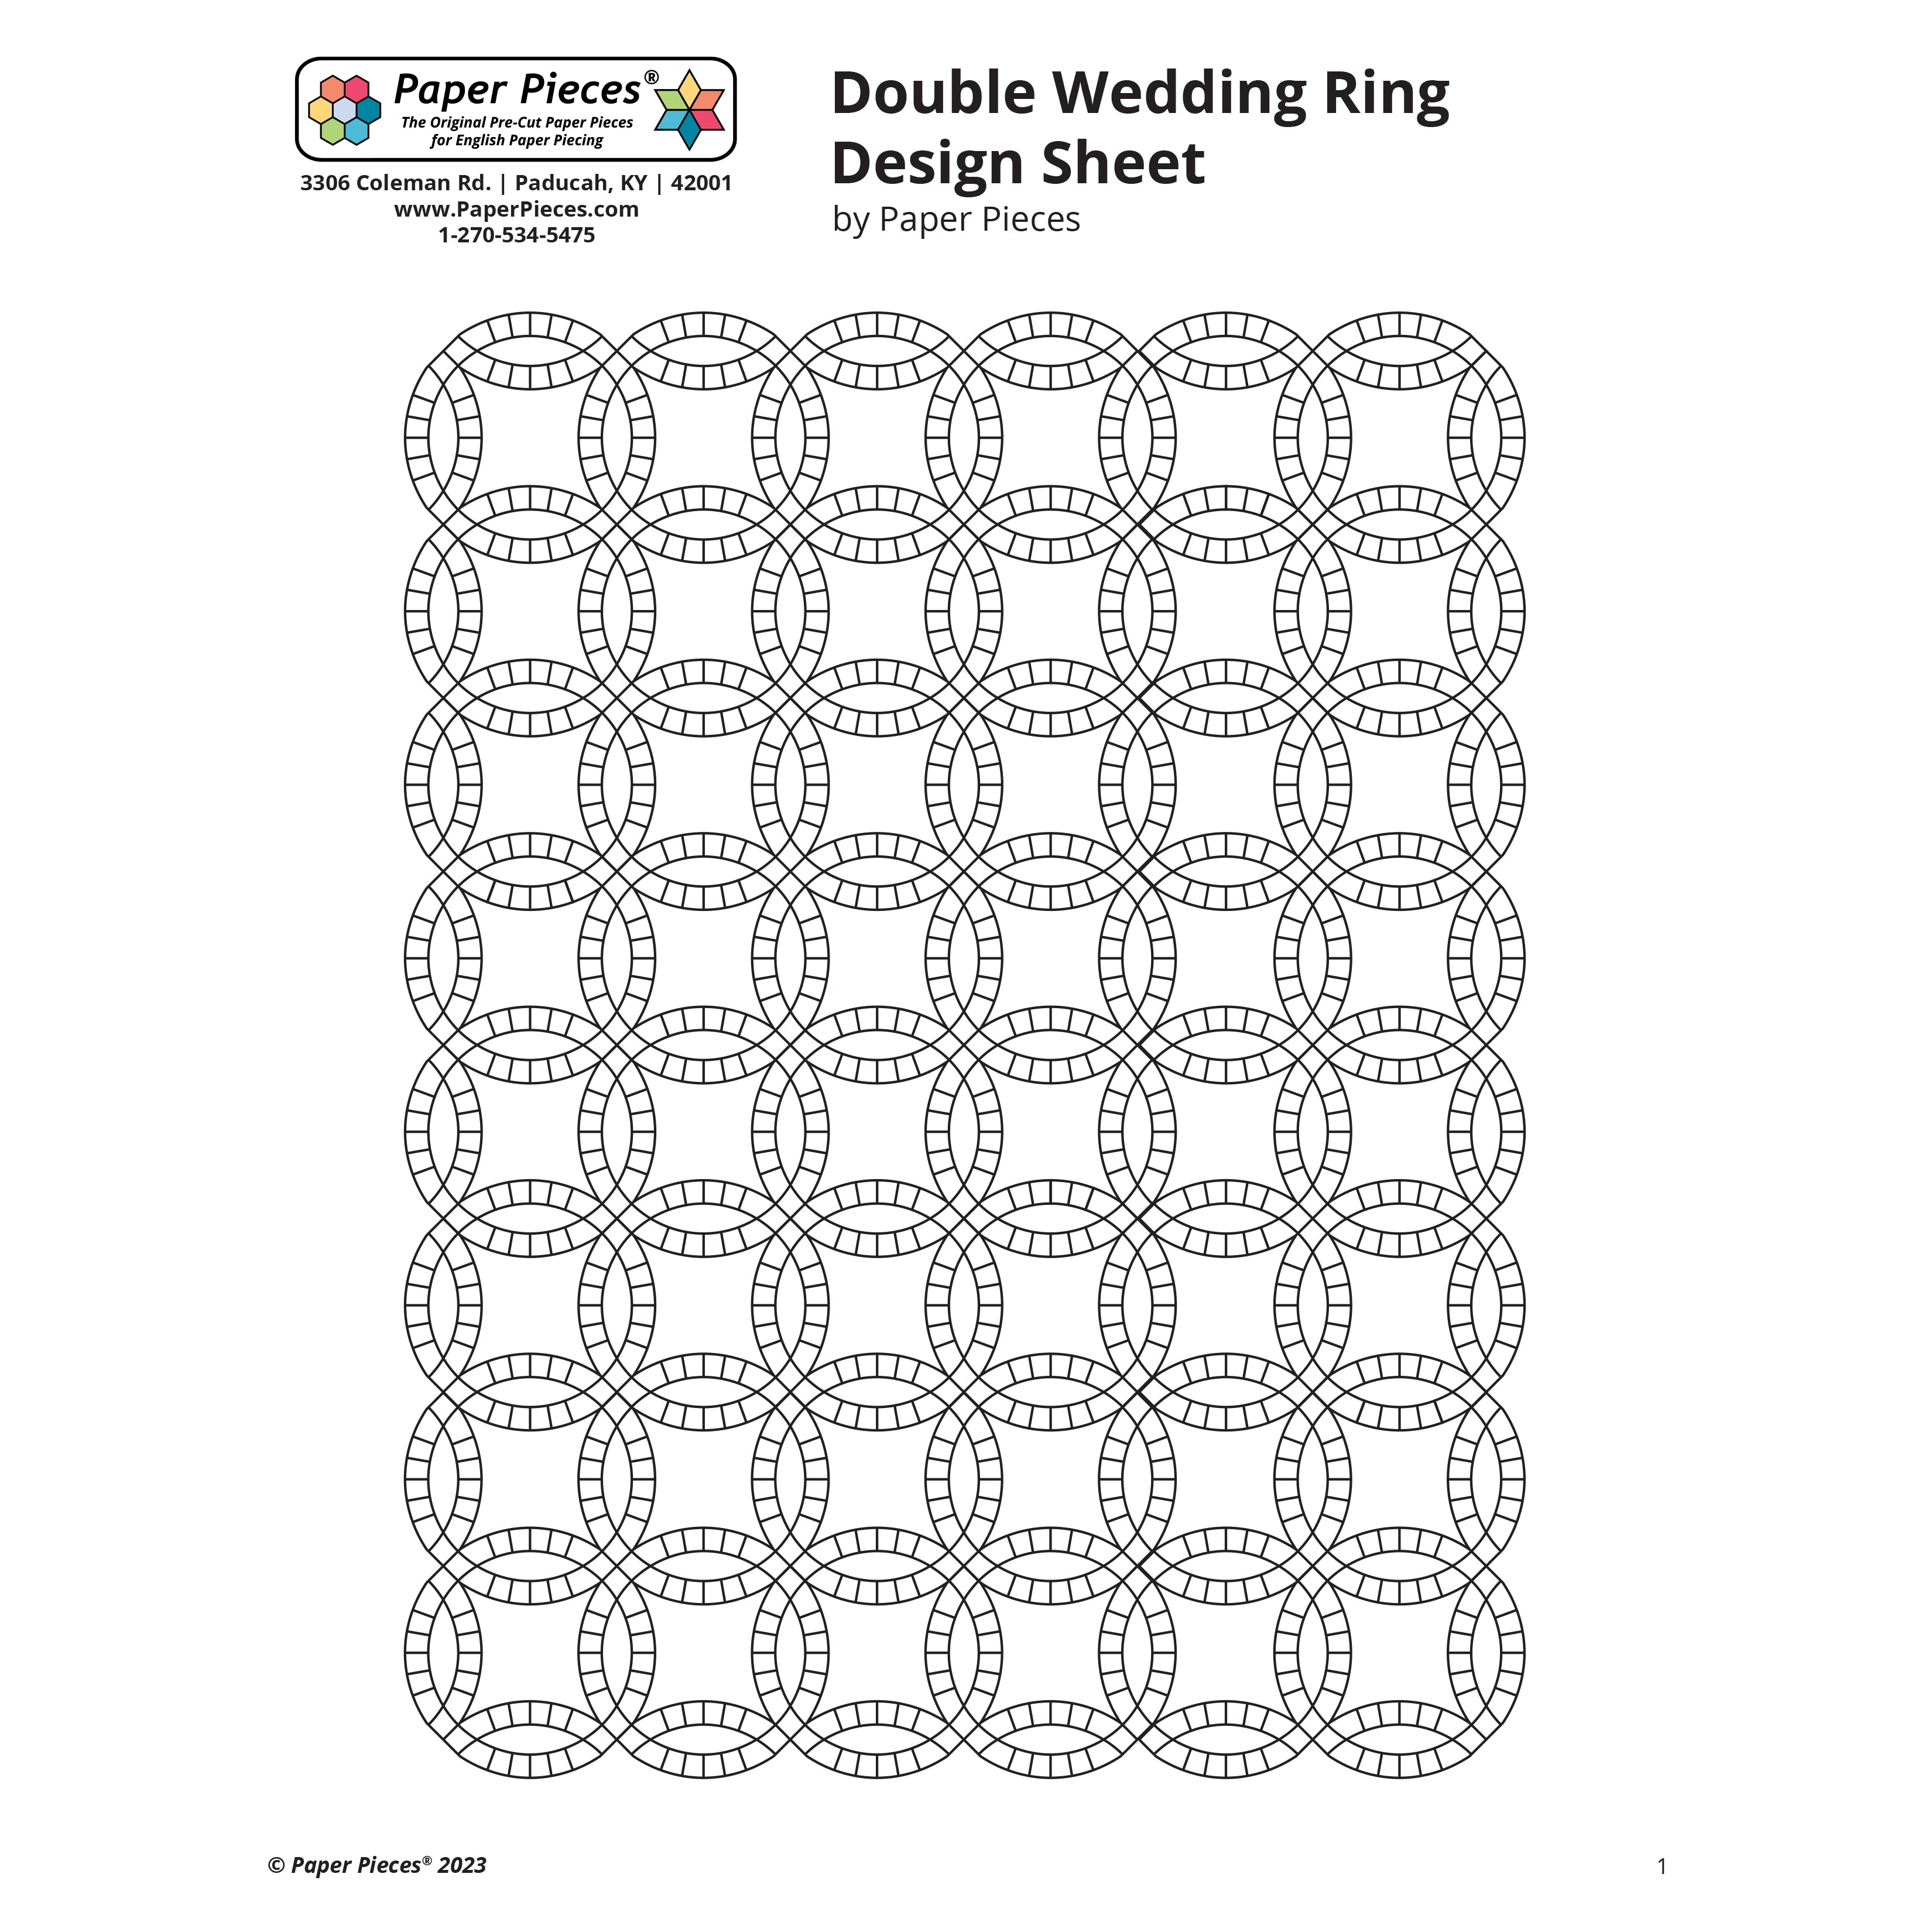 Amazon.com: Quilt in a Day Eleanor Burns Pattern, Nouveau Wedding Ring Quilt  : Arts, Crafts & Sewing